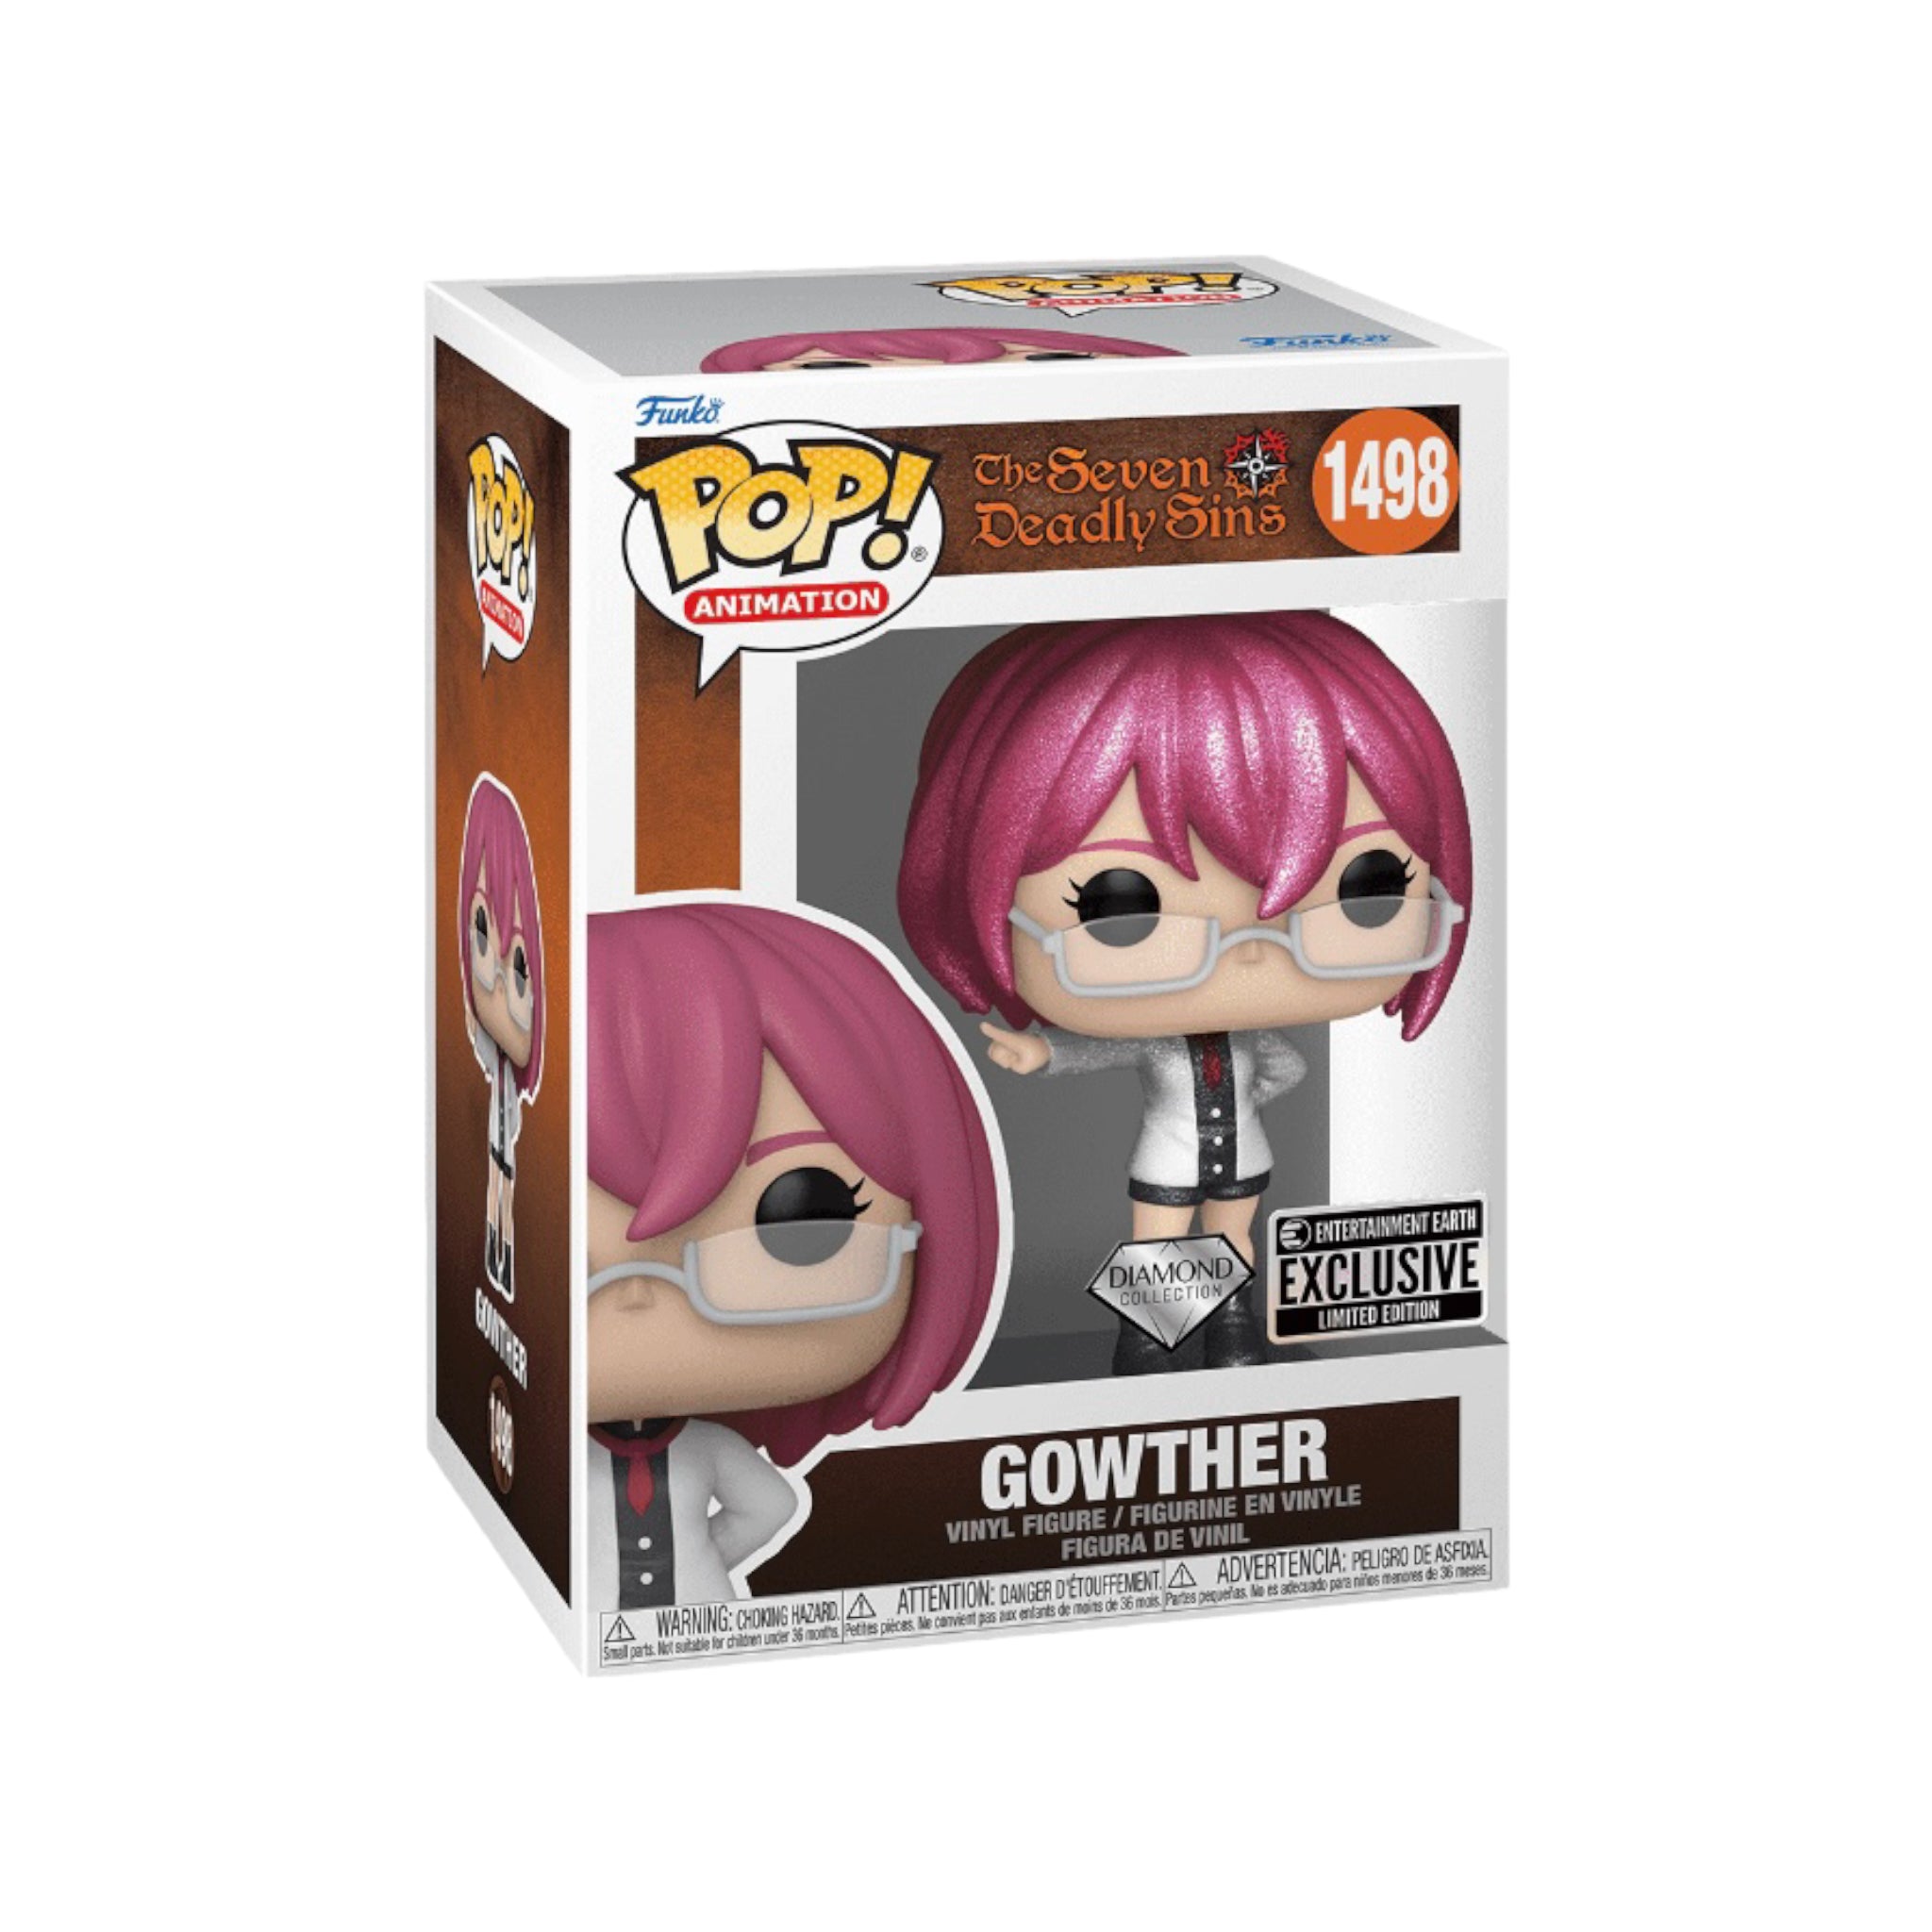 Gowther #1498 (Diamond Collection) Funko Pop! - The Seven Deadly Sins - Entertainment Earth Exclusive